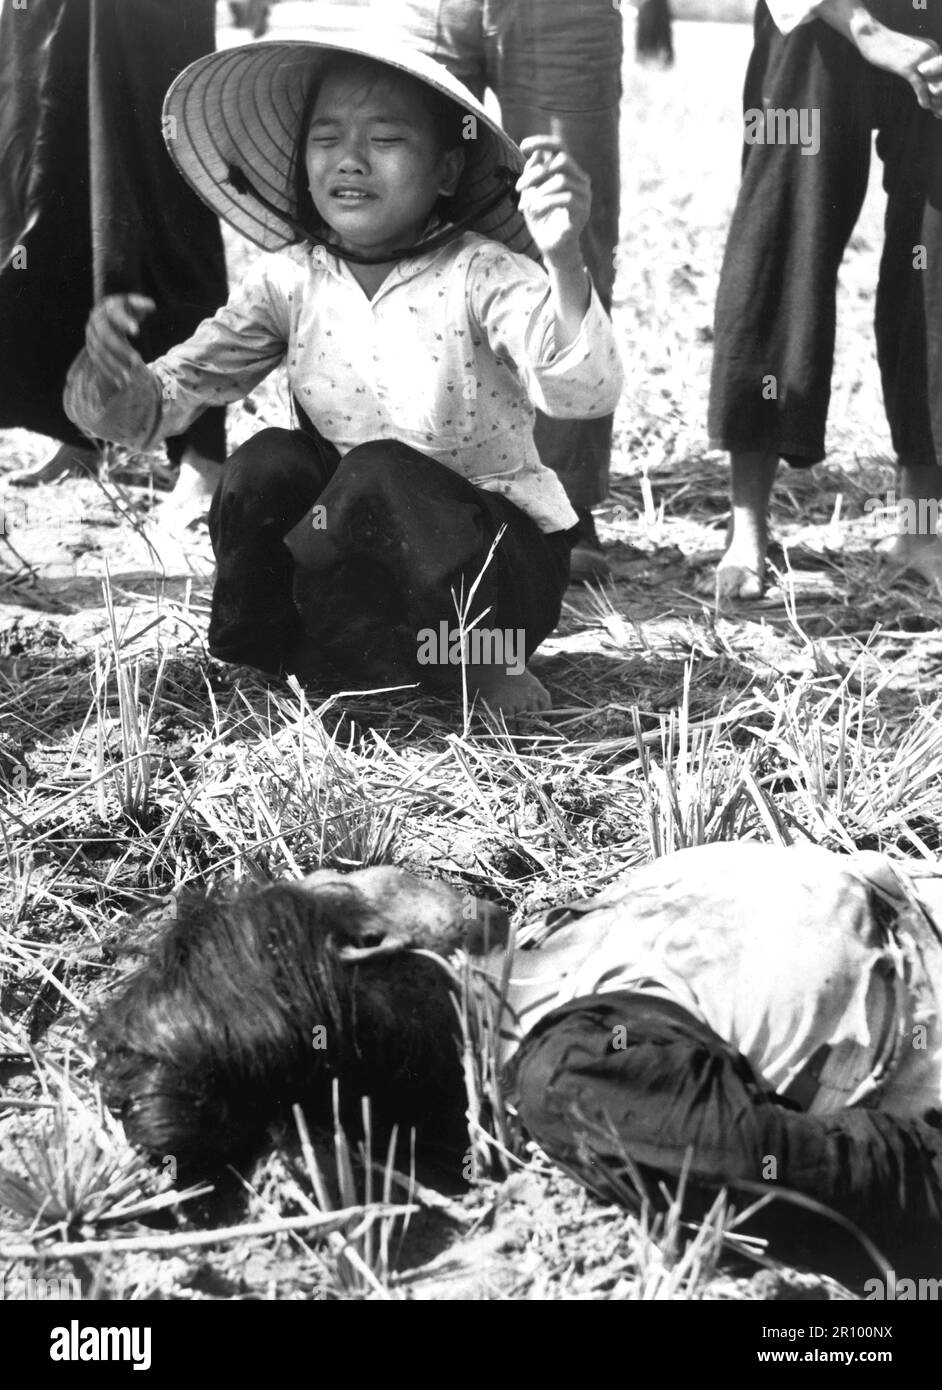 Fifteen civilians were killed in the explosion of a homemade Viet Cong mine on a country road in Tuy Hoa.  Most of the victims were riding in a truck which struck the mine and was ripped apart by the blast.  Circa 1966. Stock Photo